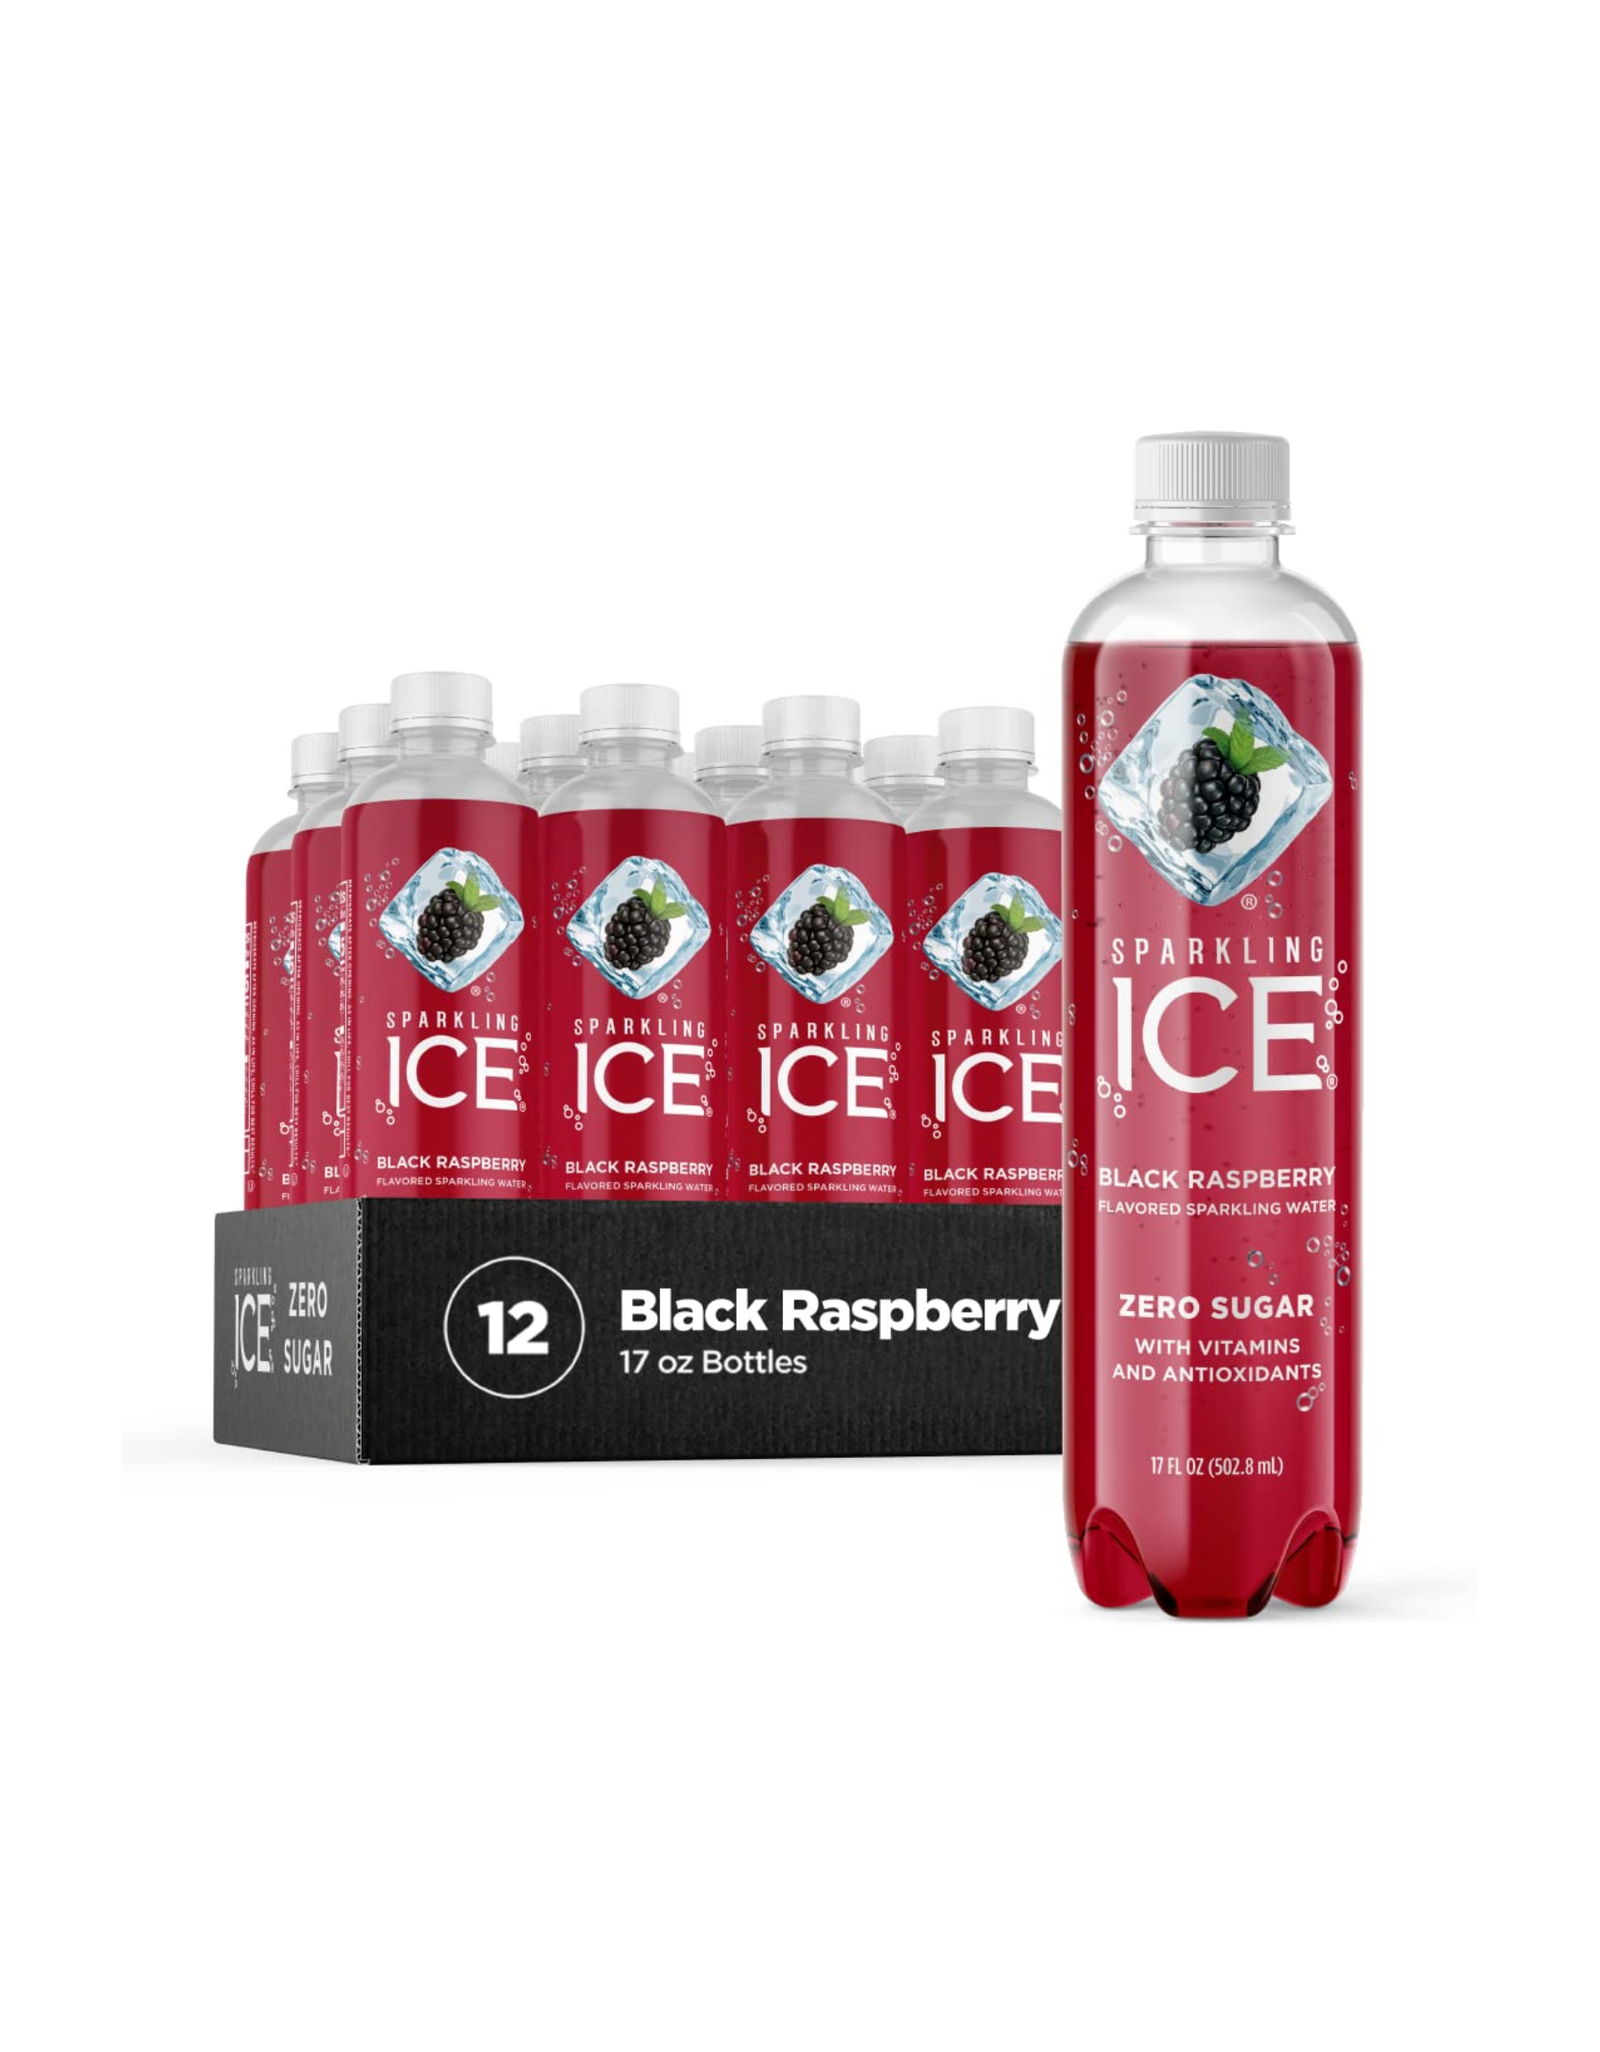 Sparkling ICE, Black Raspberry Sparkling Water, with Vitamins and Antioxidants, 17 fl oz (Pack of 12)